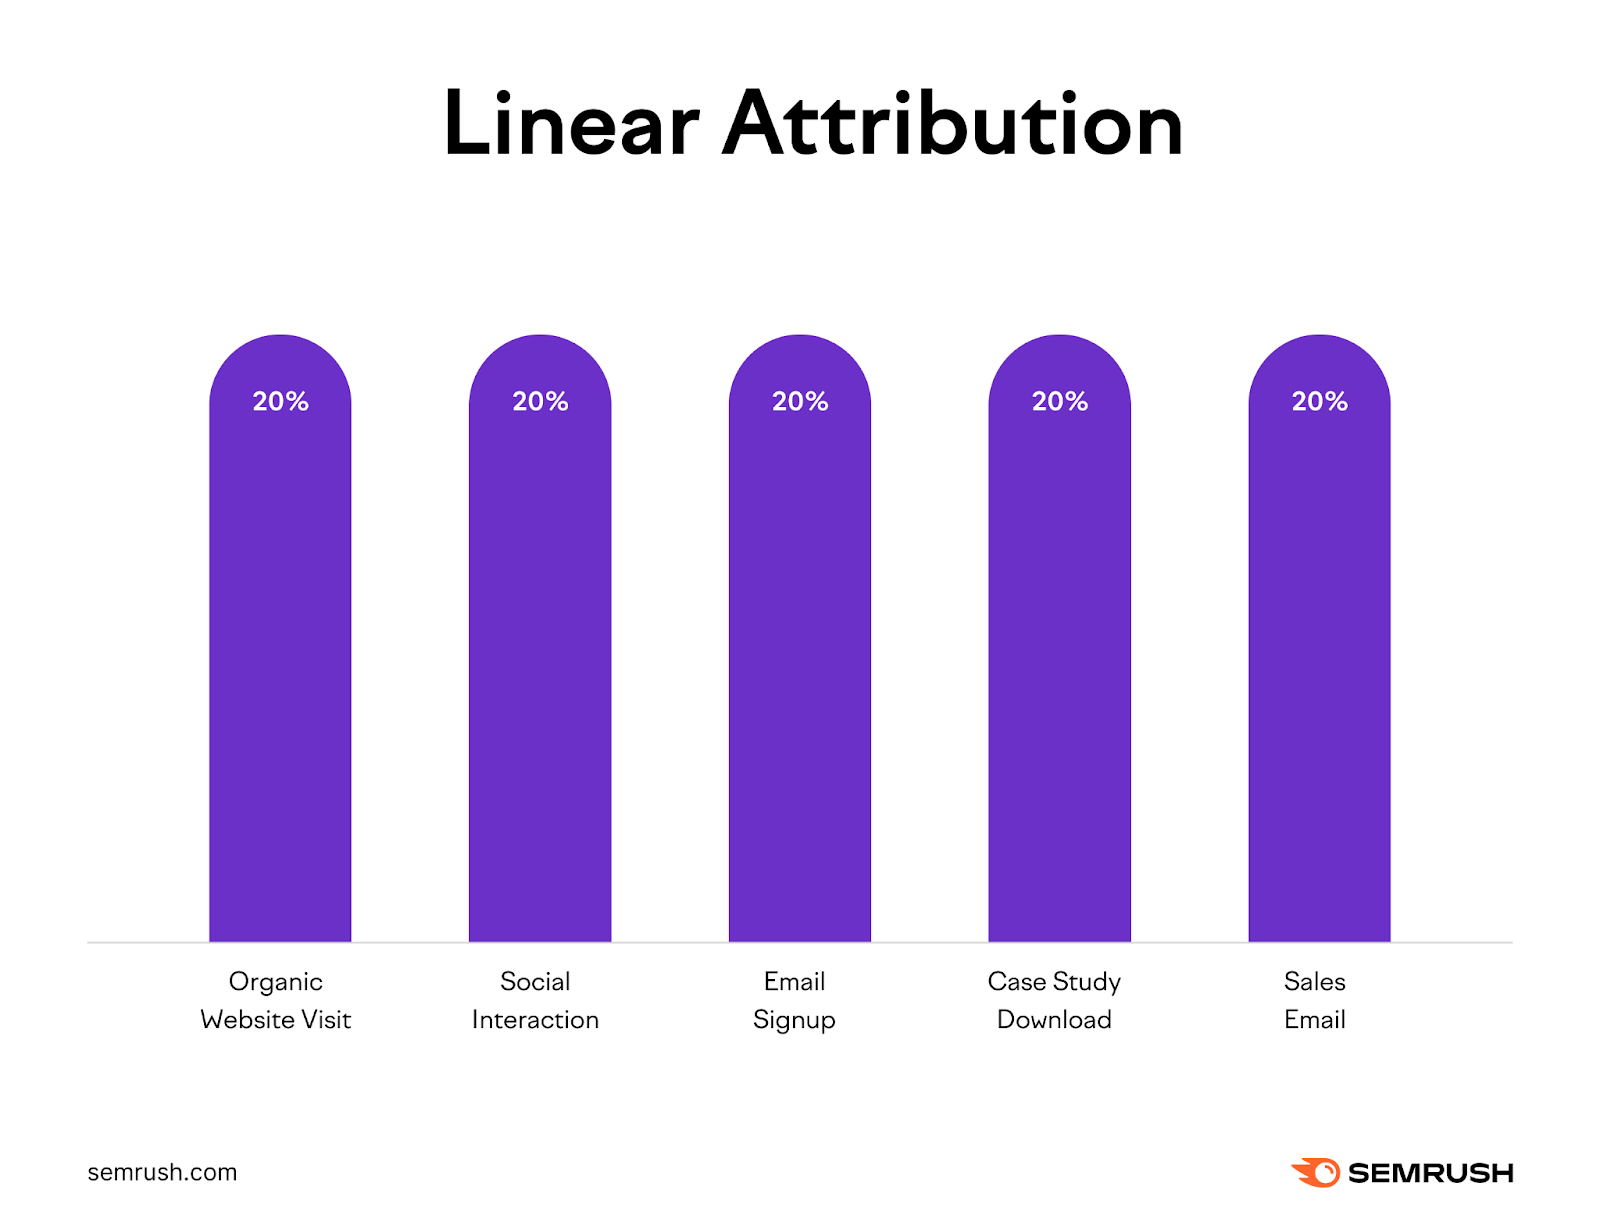 Linear attribution assigns equal credit to all touchpoints.